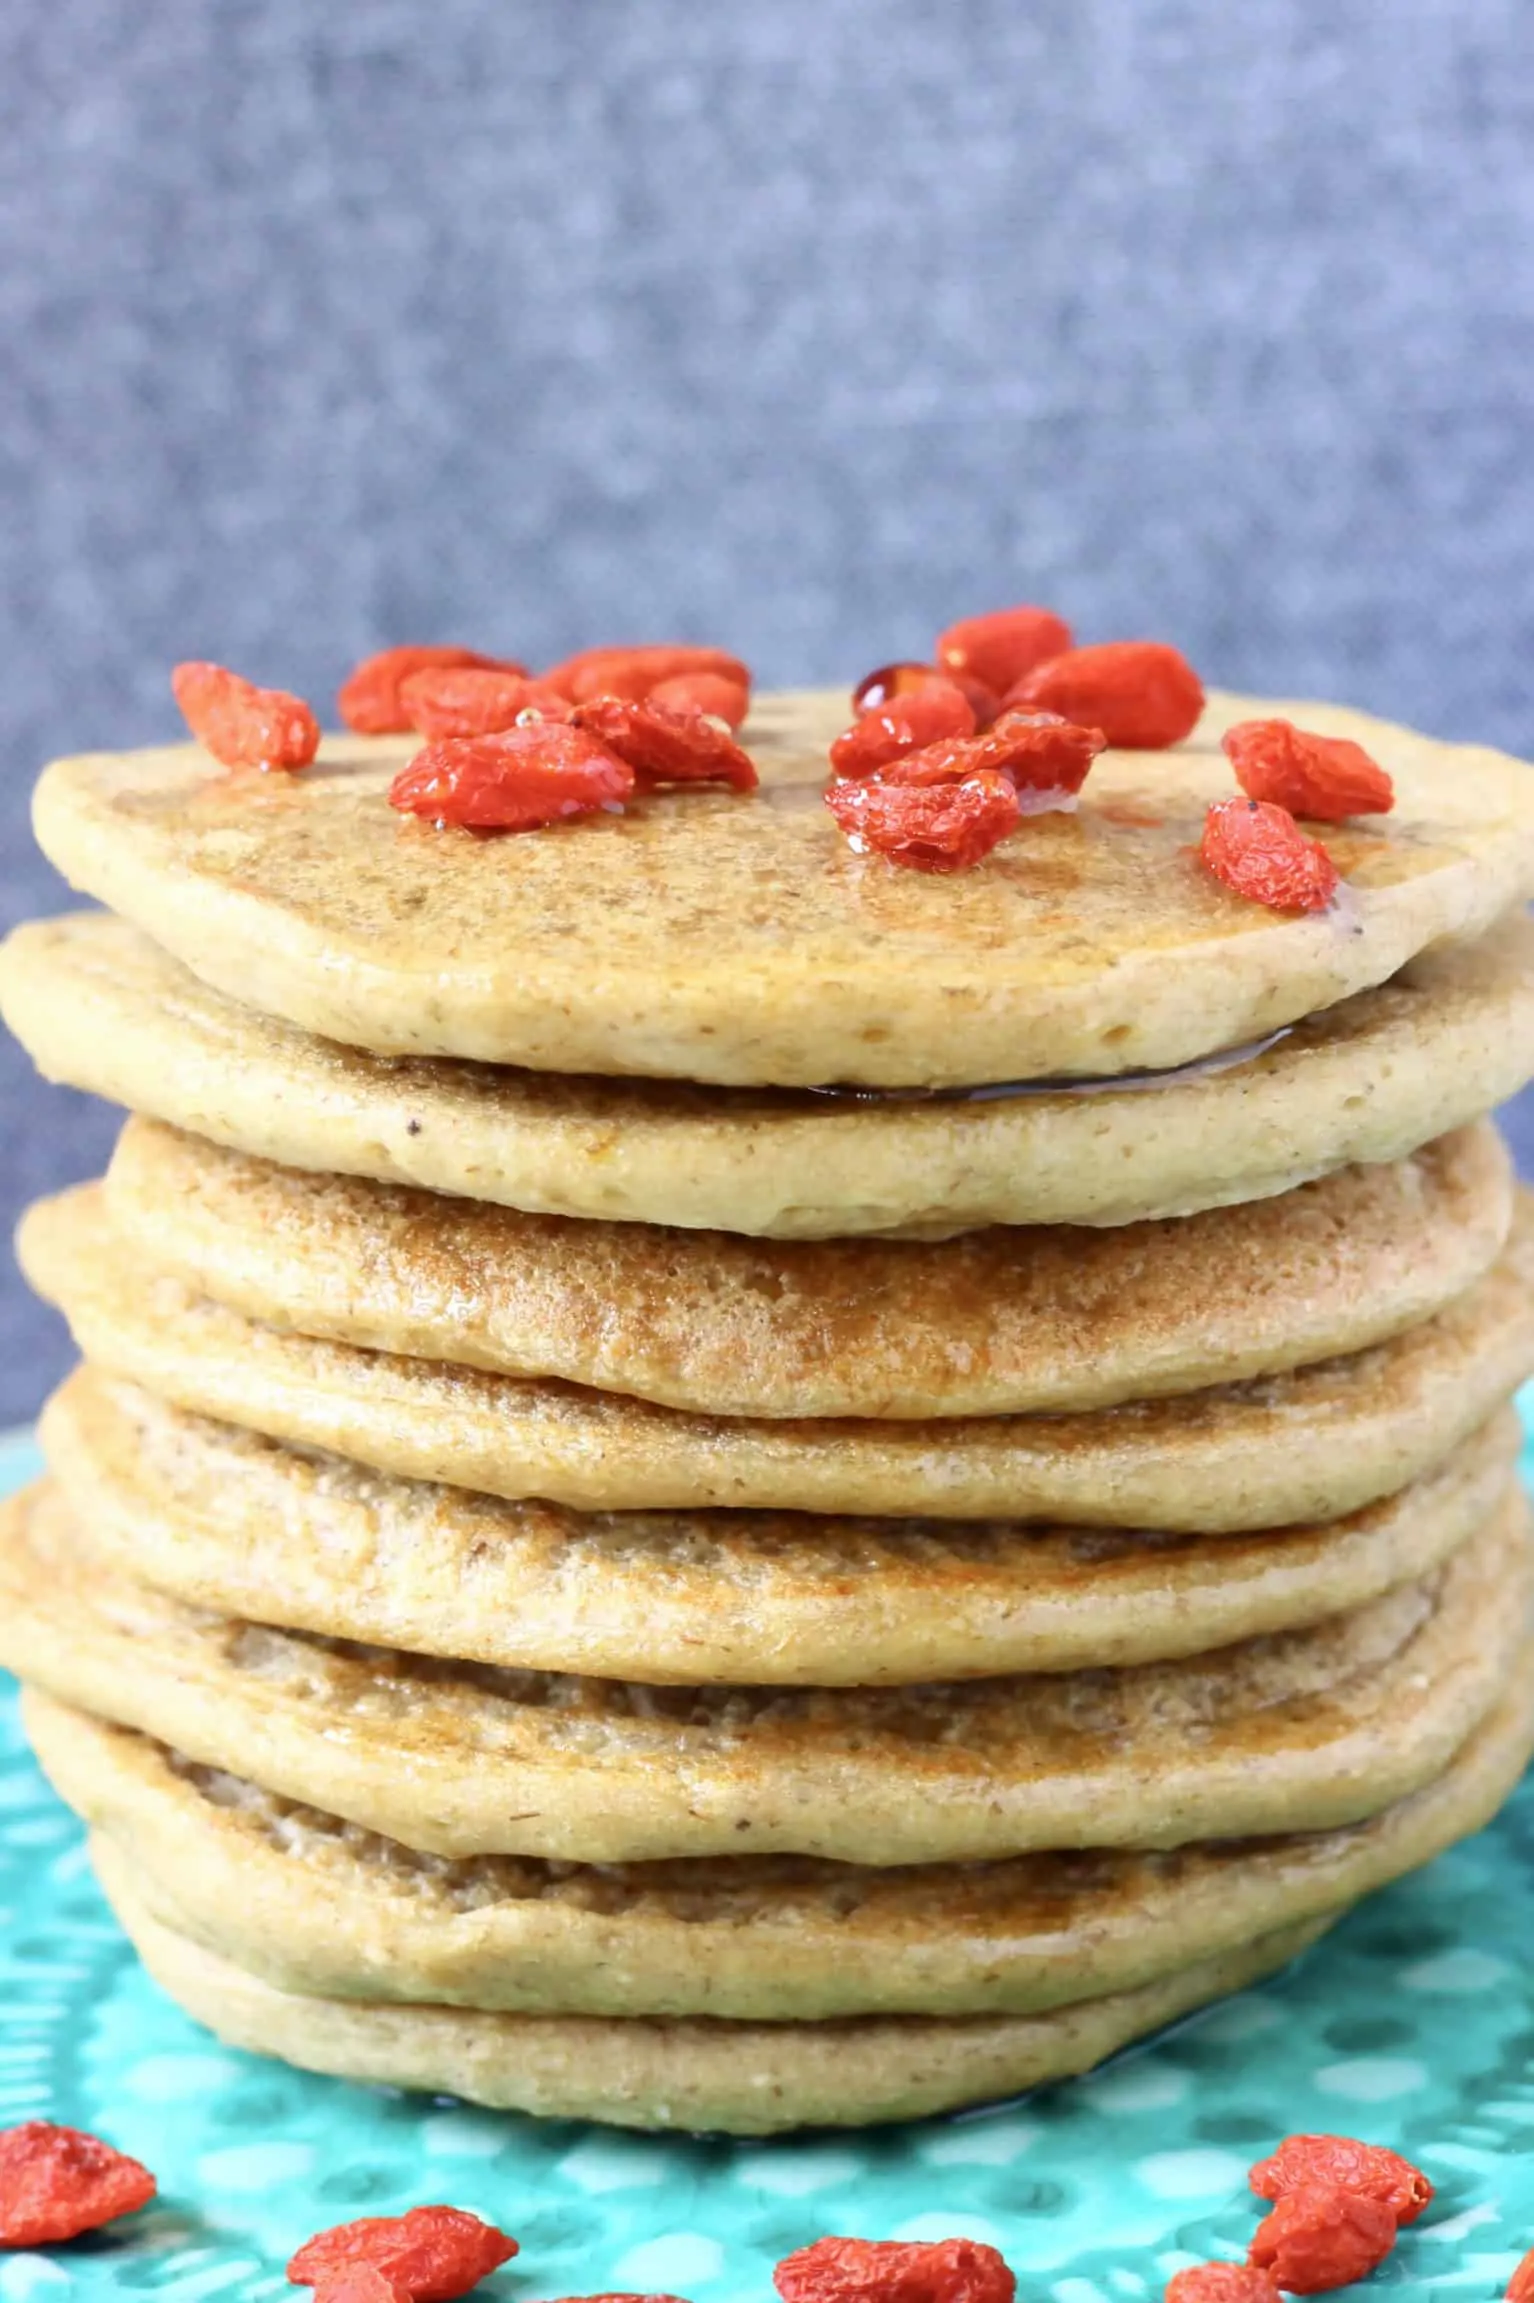 A stack of banana oatmeal pancakes decorated with goji berries on a green plate against a grey background